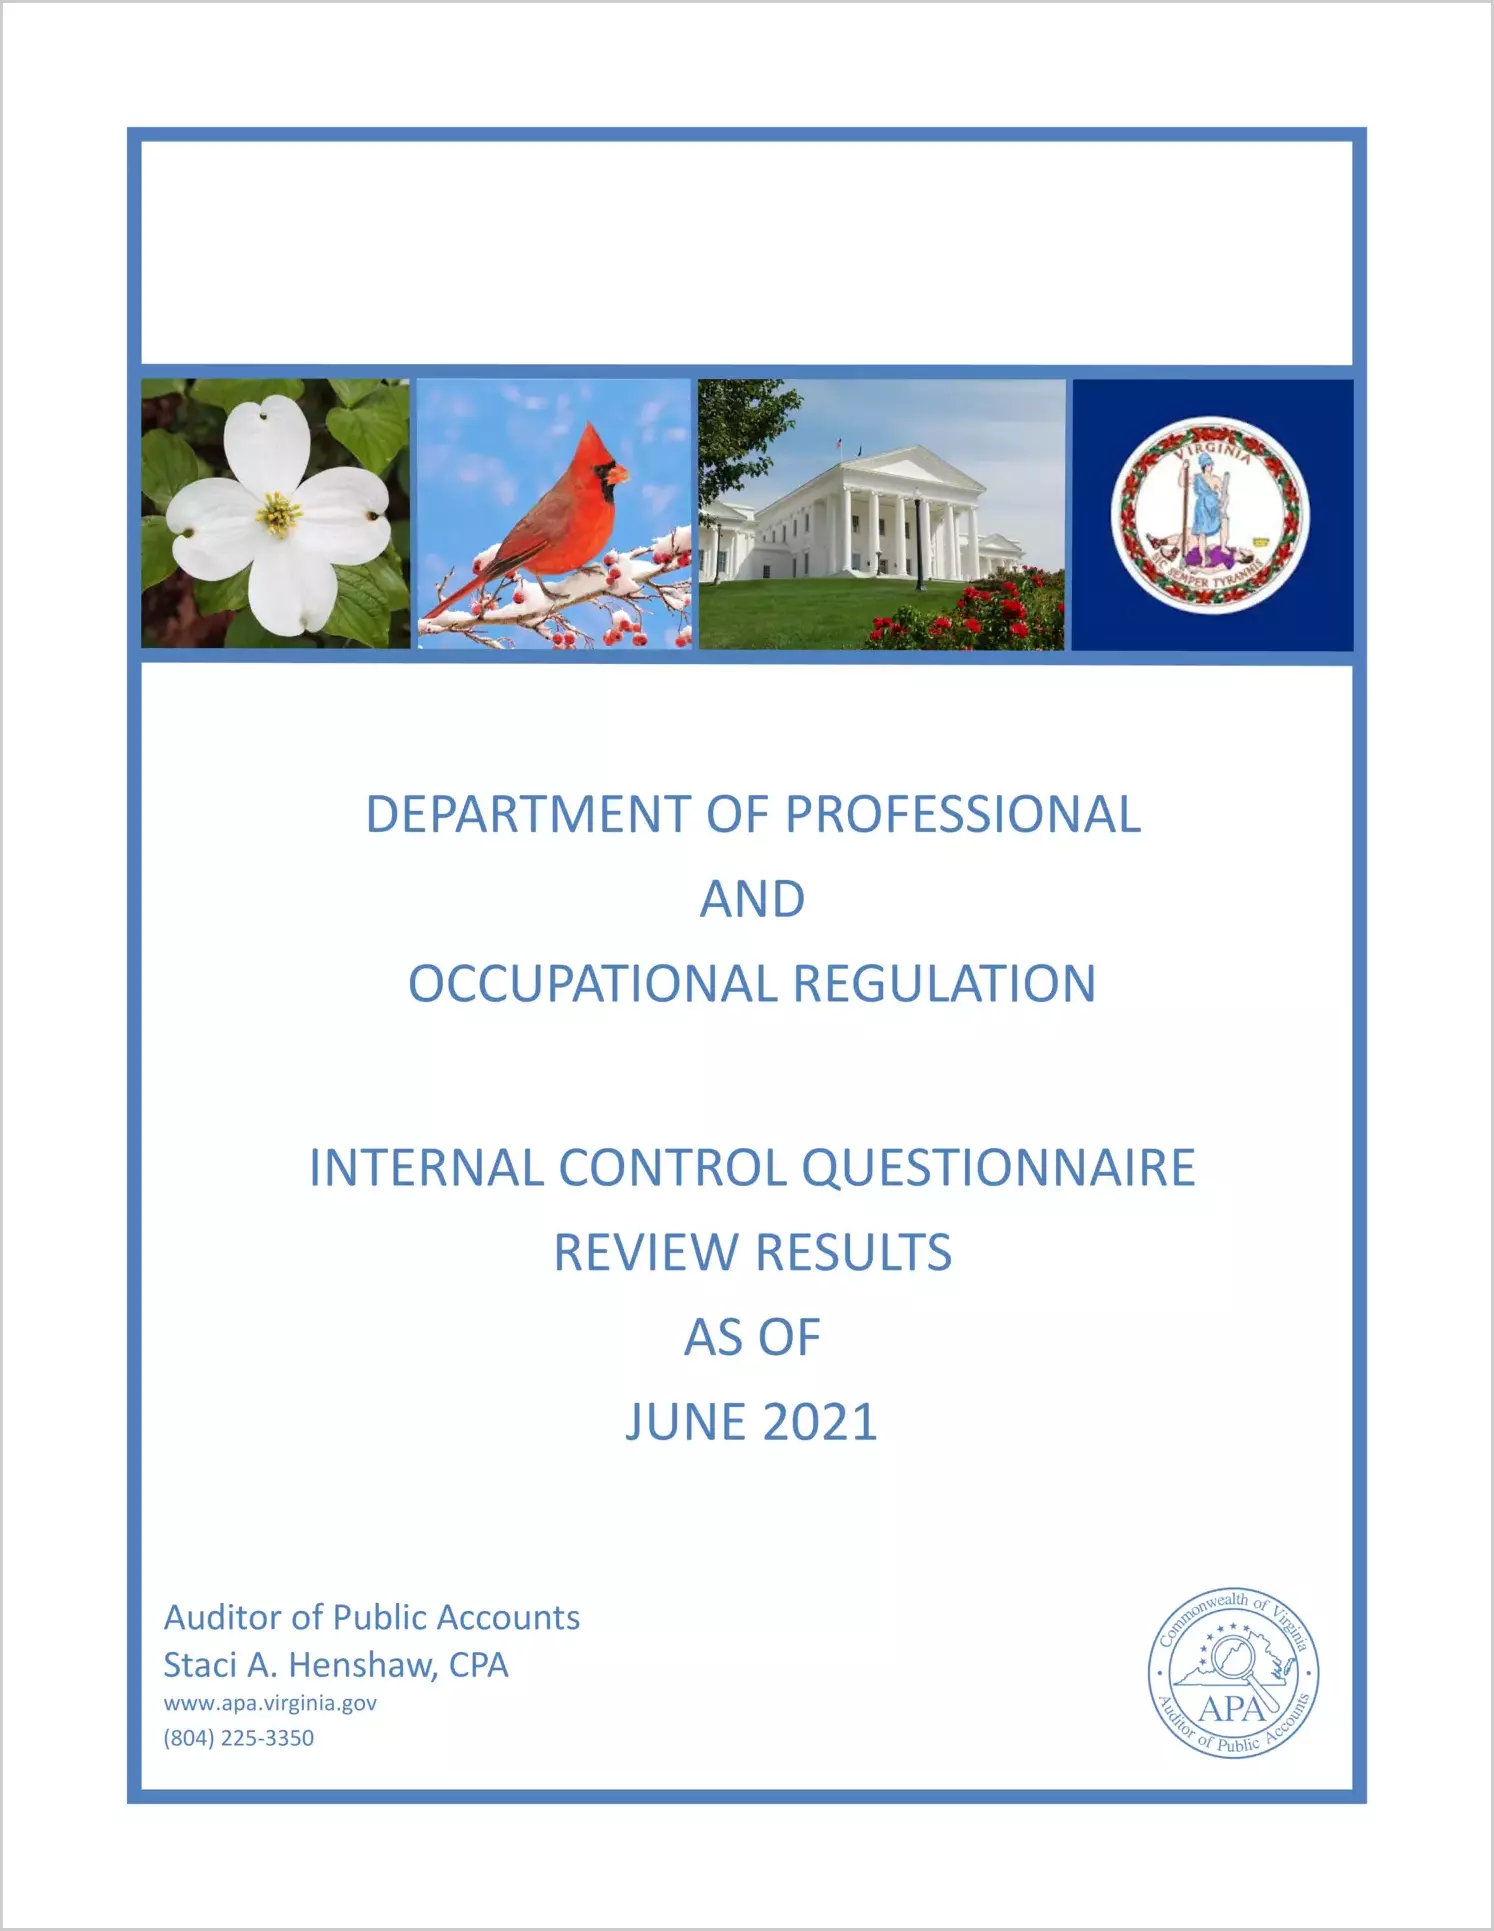 Department of Professional and Occupational Regulations Internal Control Questionnaire Review Results as of June 2021